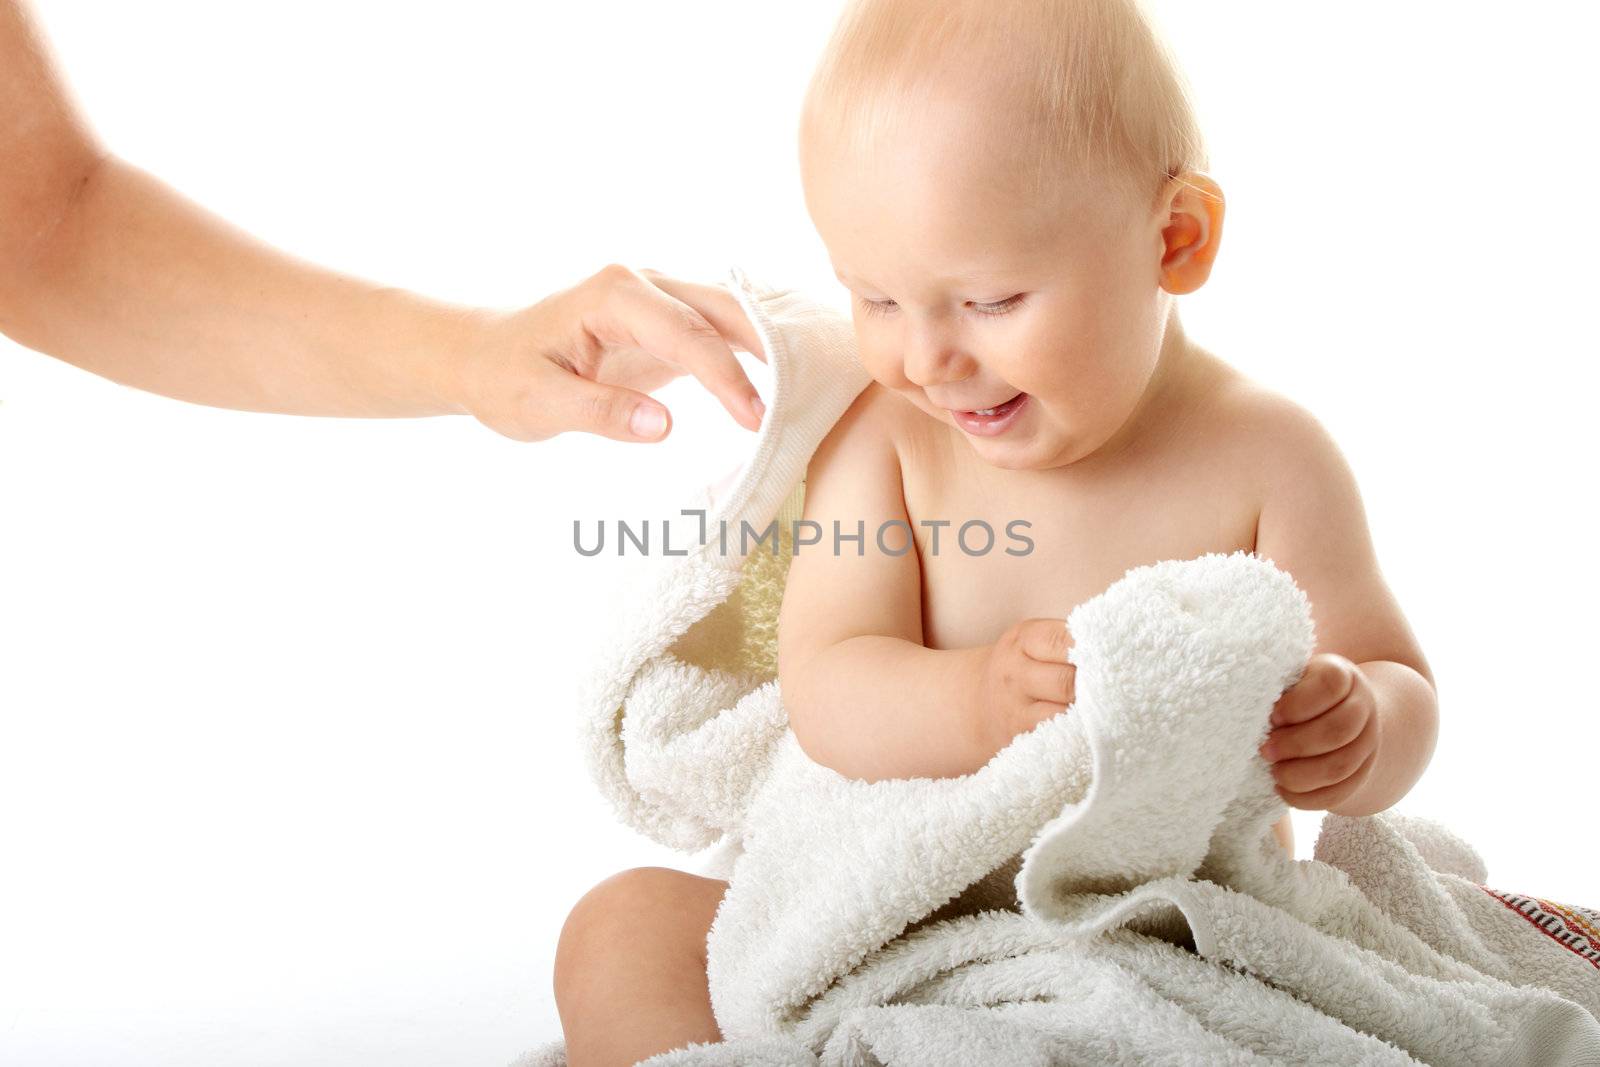 Baby after bath. Cheerful child isolated